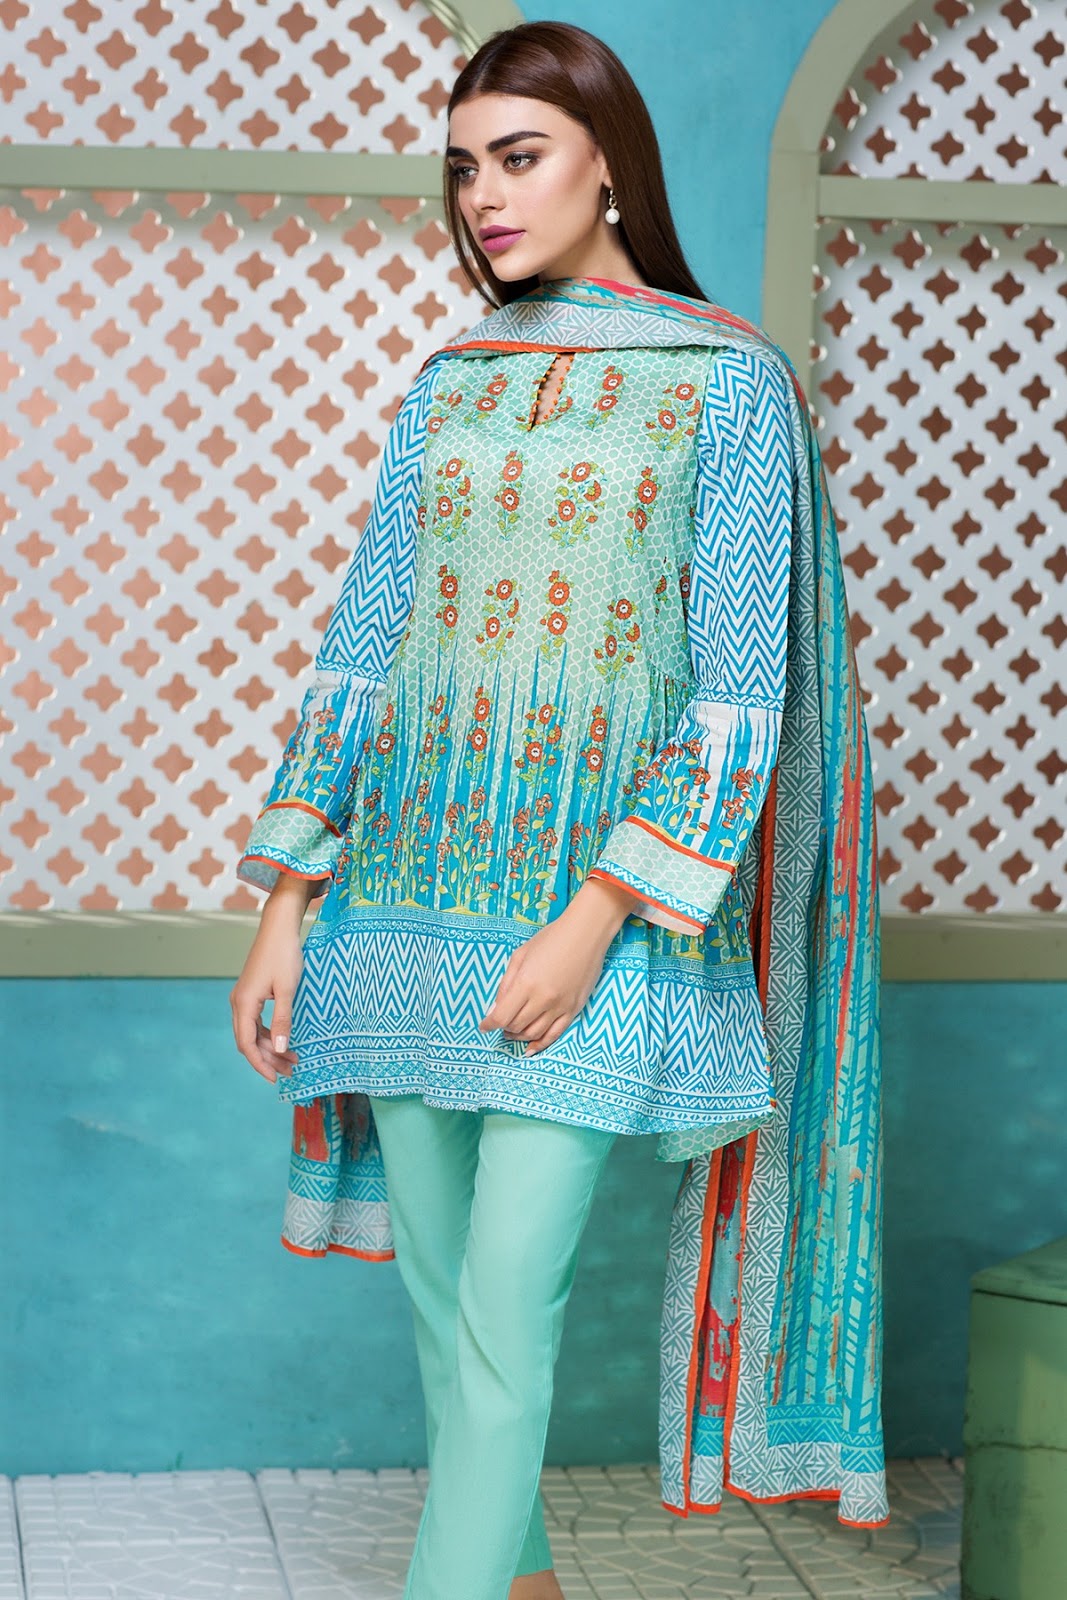 Khaadi Unstitched Eid Collection 2017 A17309-B-GREEN with model Sadaf ...